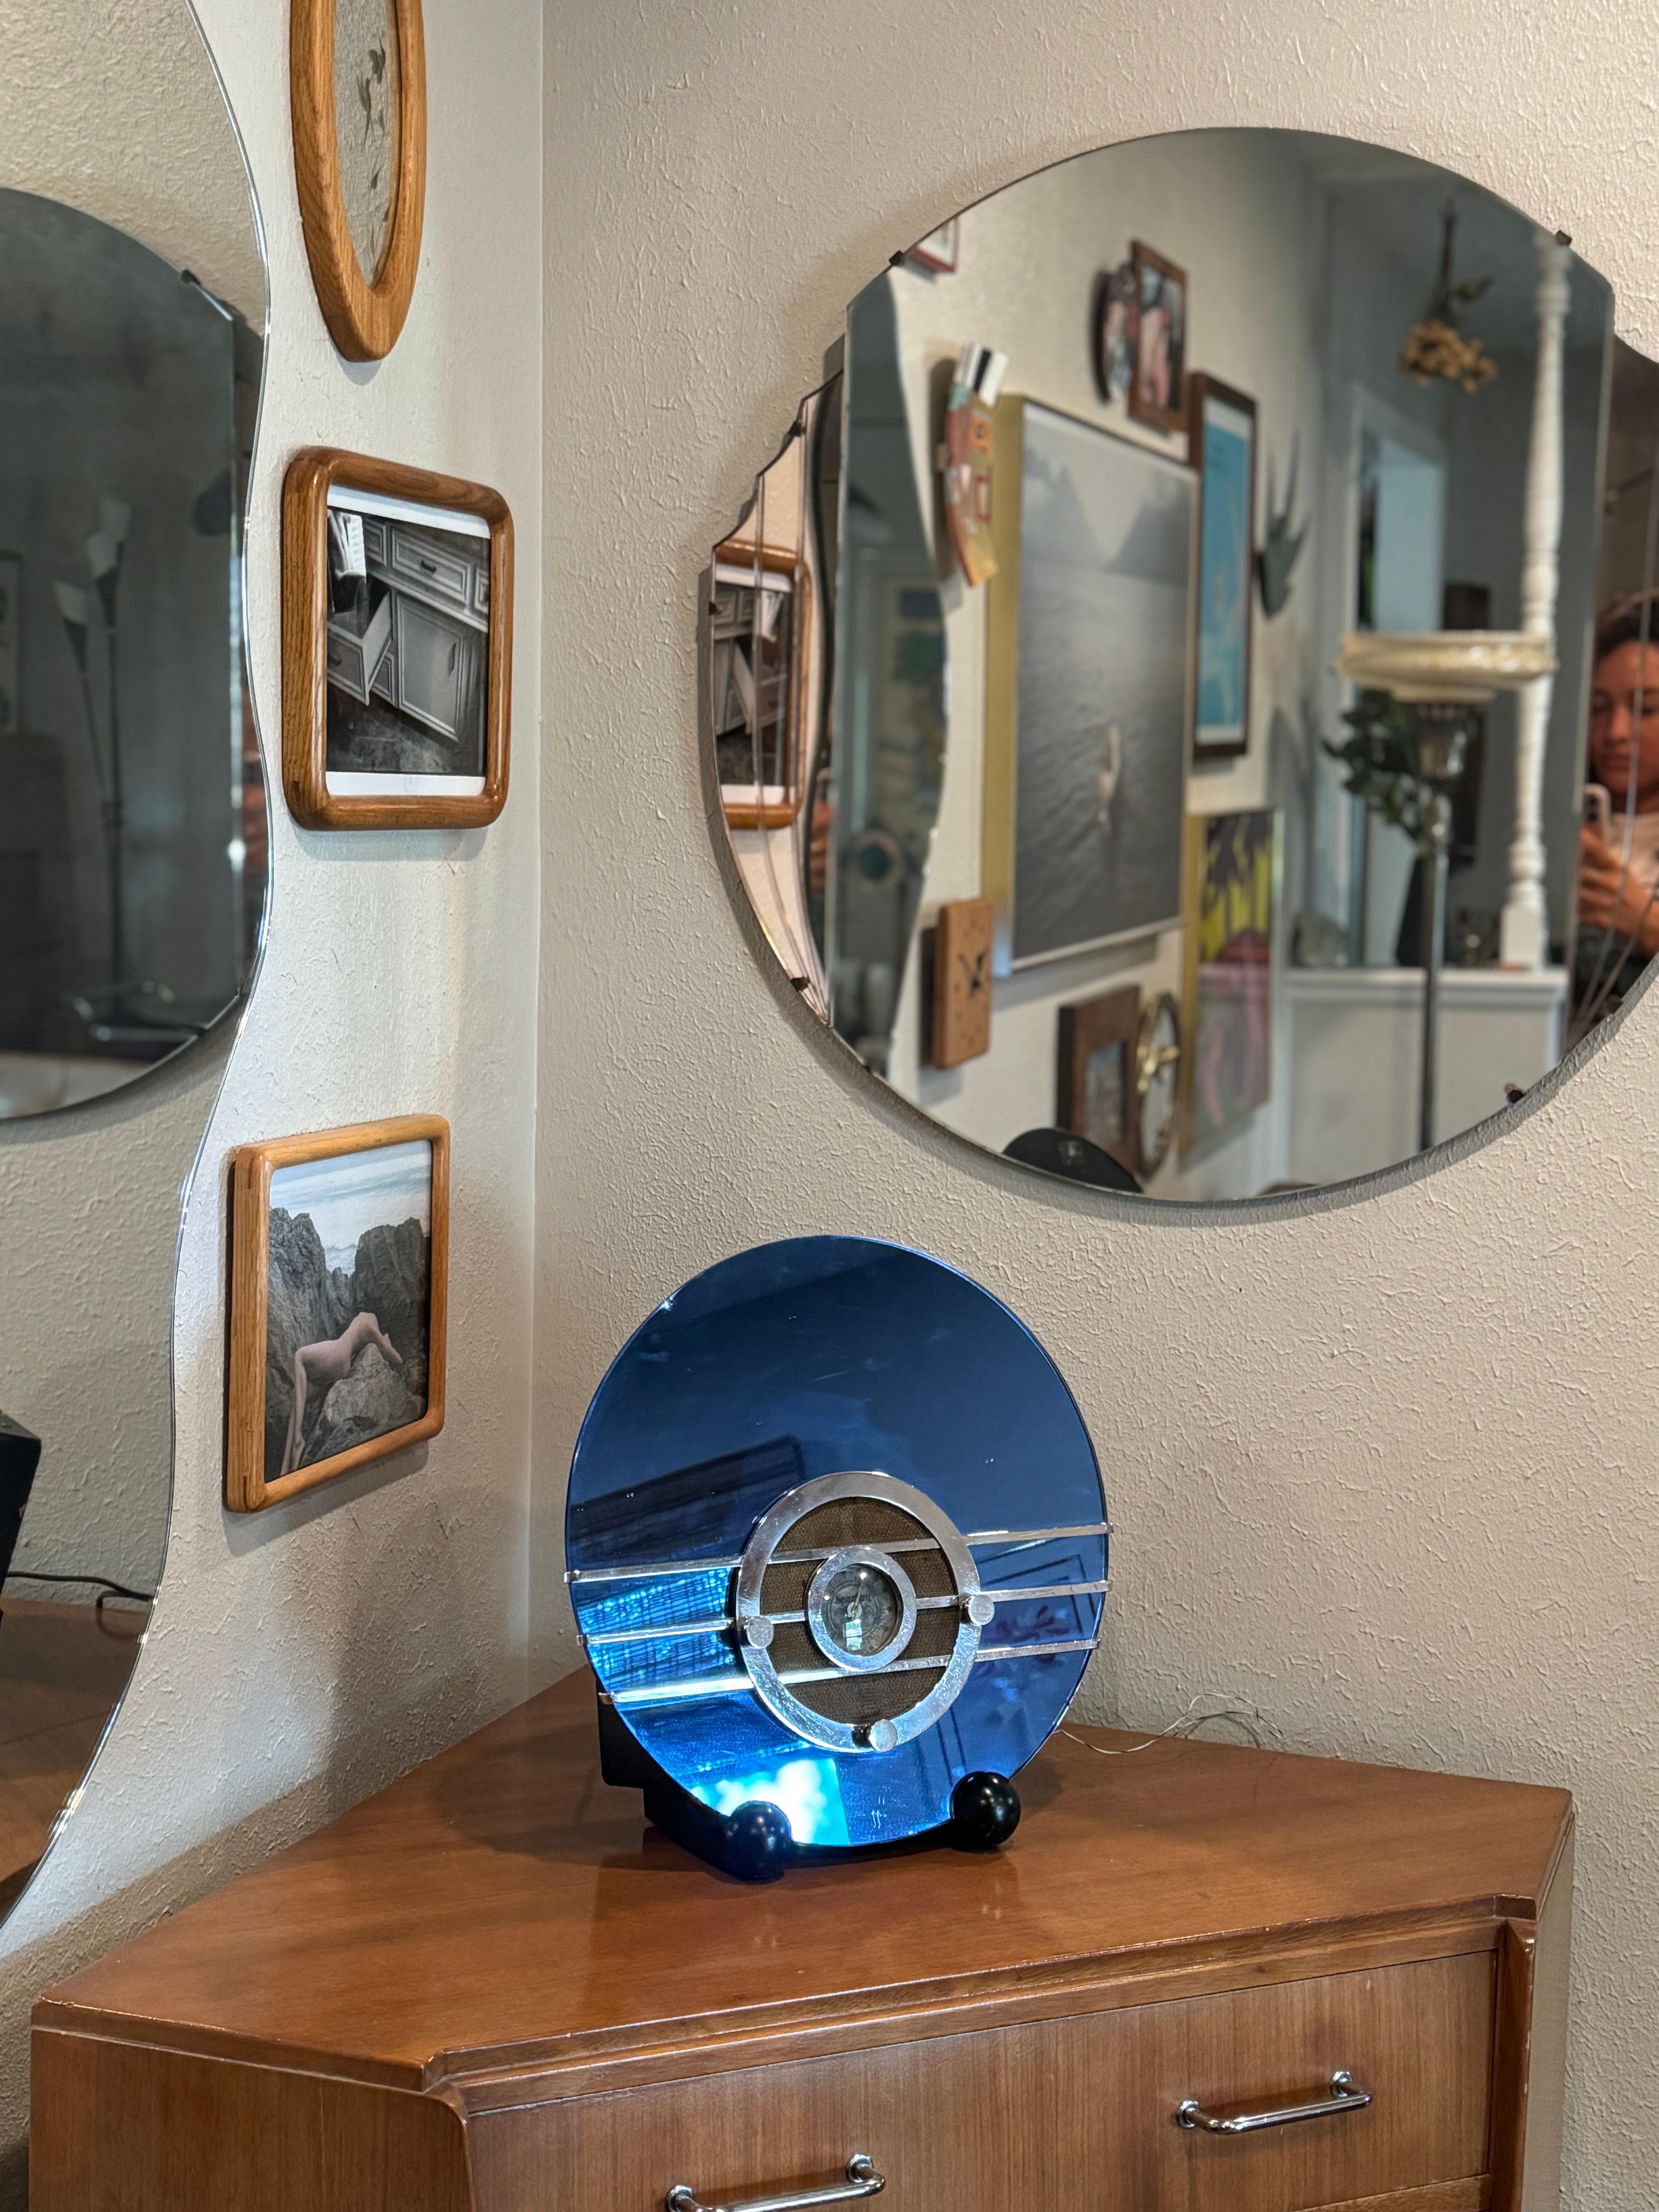 Beautiful original Art Deco Sparton 'Bluebird' cobalt blue mirror model 566 radio designed by Walter Dorwin Teague for the Sparks-Worthington Company from Jackson, Michigan in 1936. The radio, known as the 'Bluebird' is a considered to be a great